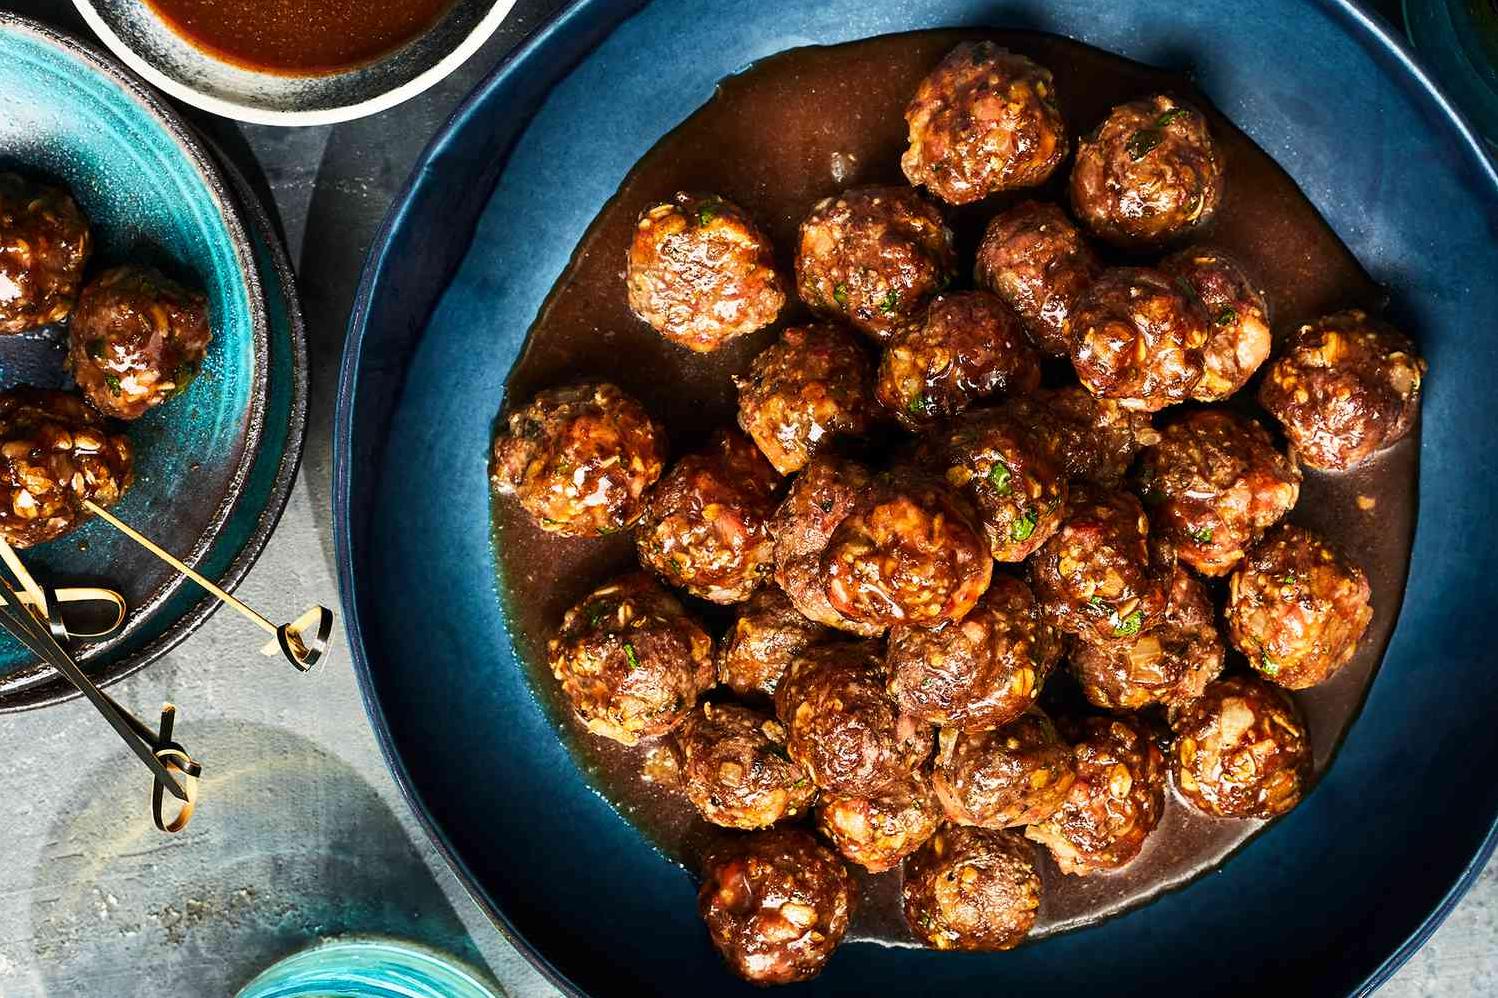  Get ready for a gourmet feast with these venison meatballs